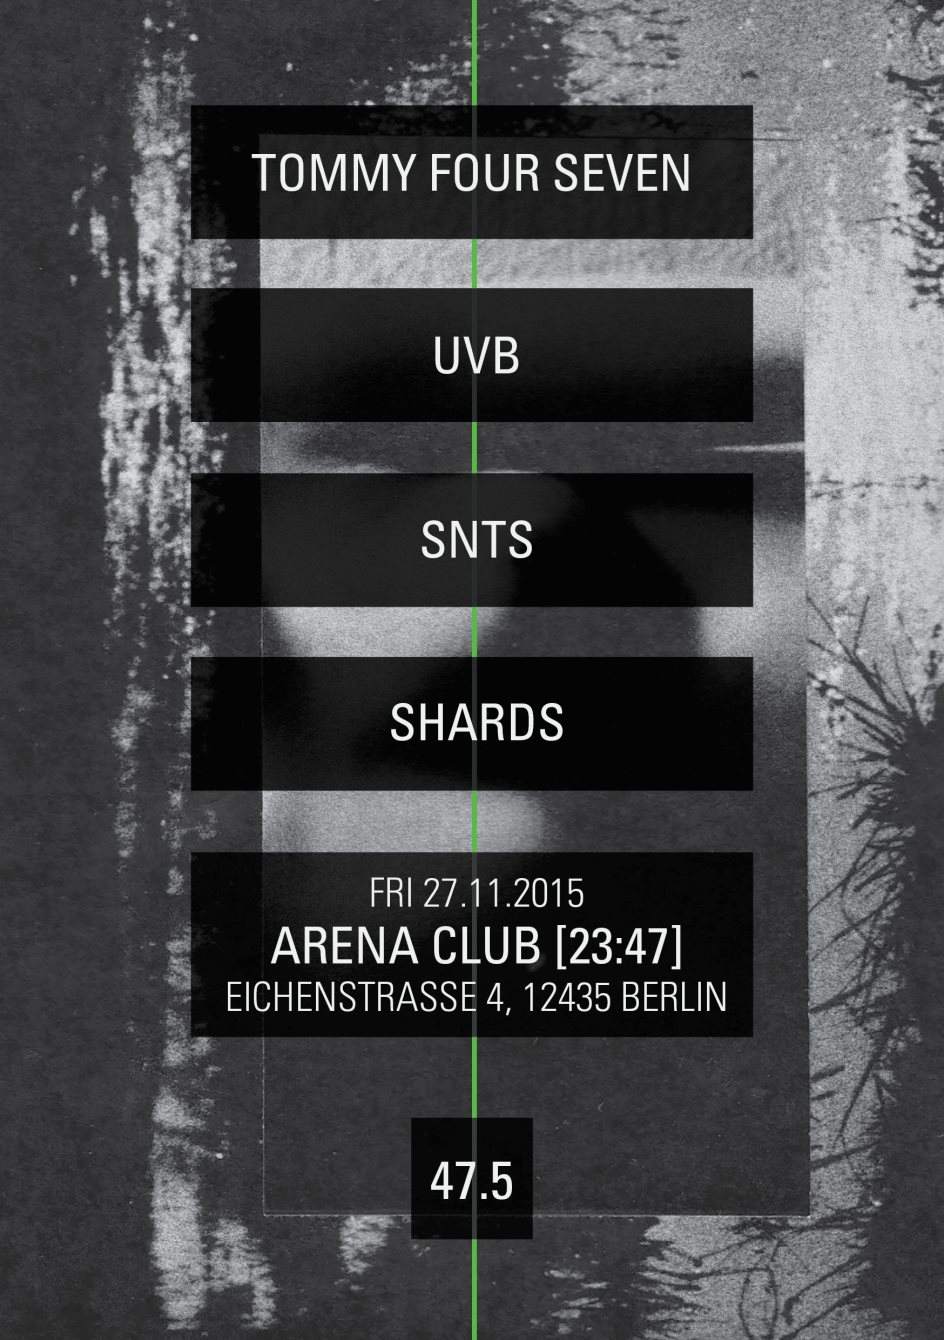 47.5 with Tommy Four Seven, UVB, Snts & Shards - フライヤー裏